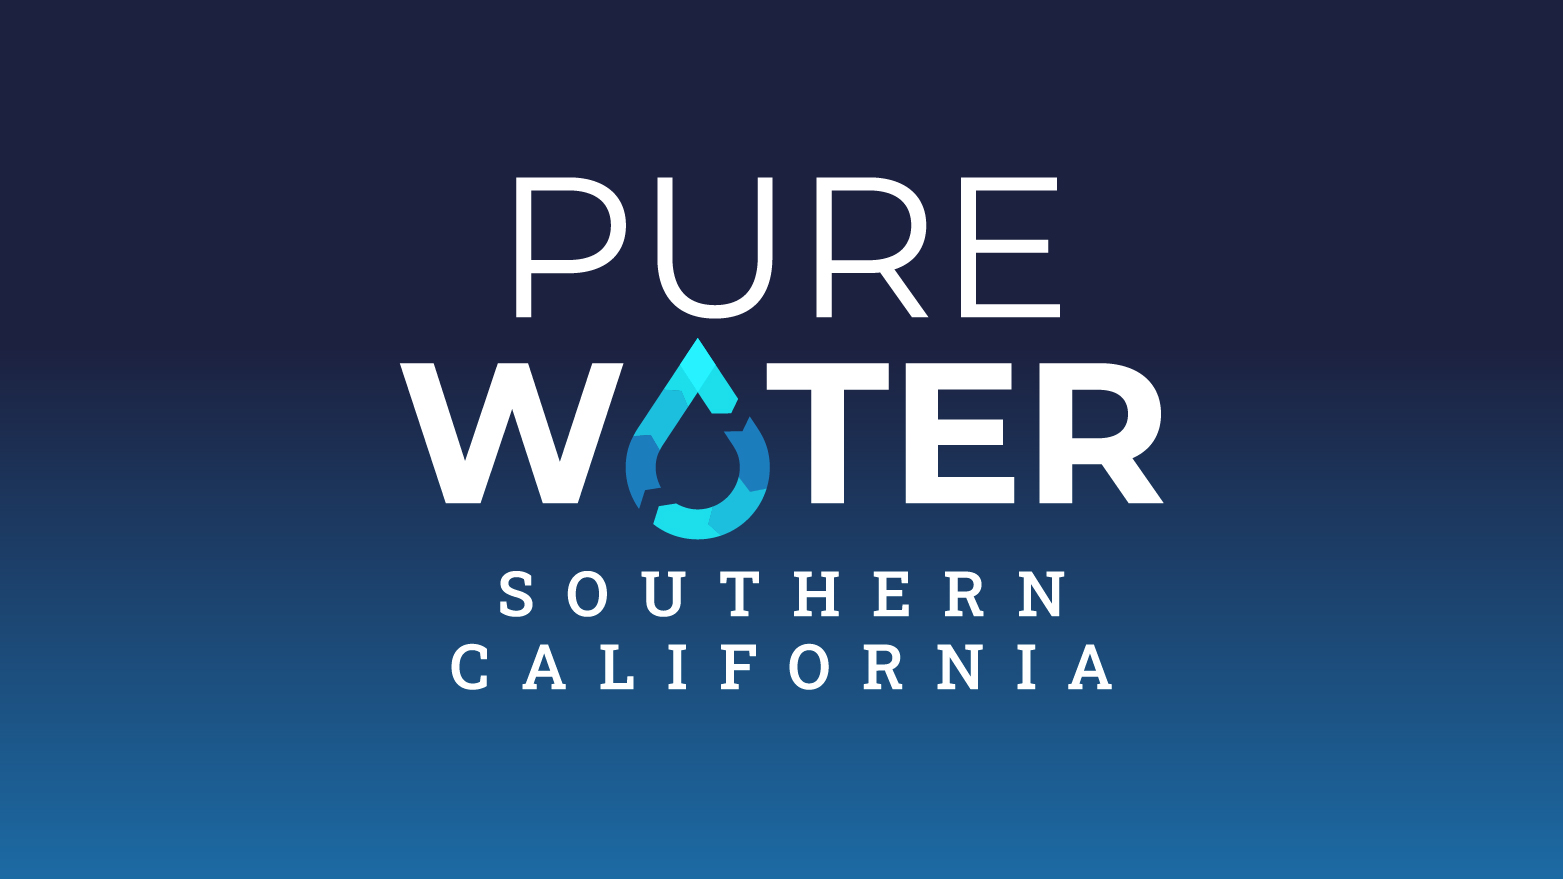 Pure Water Southern California becomes the official name of the program